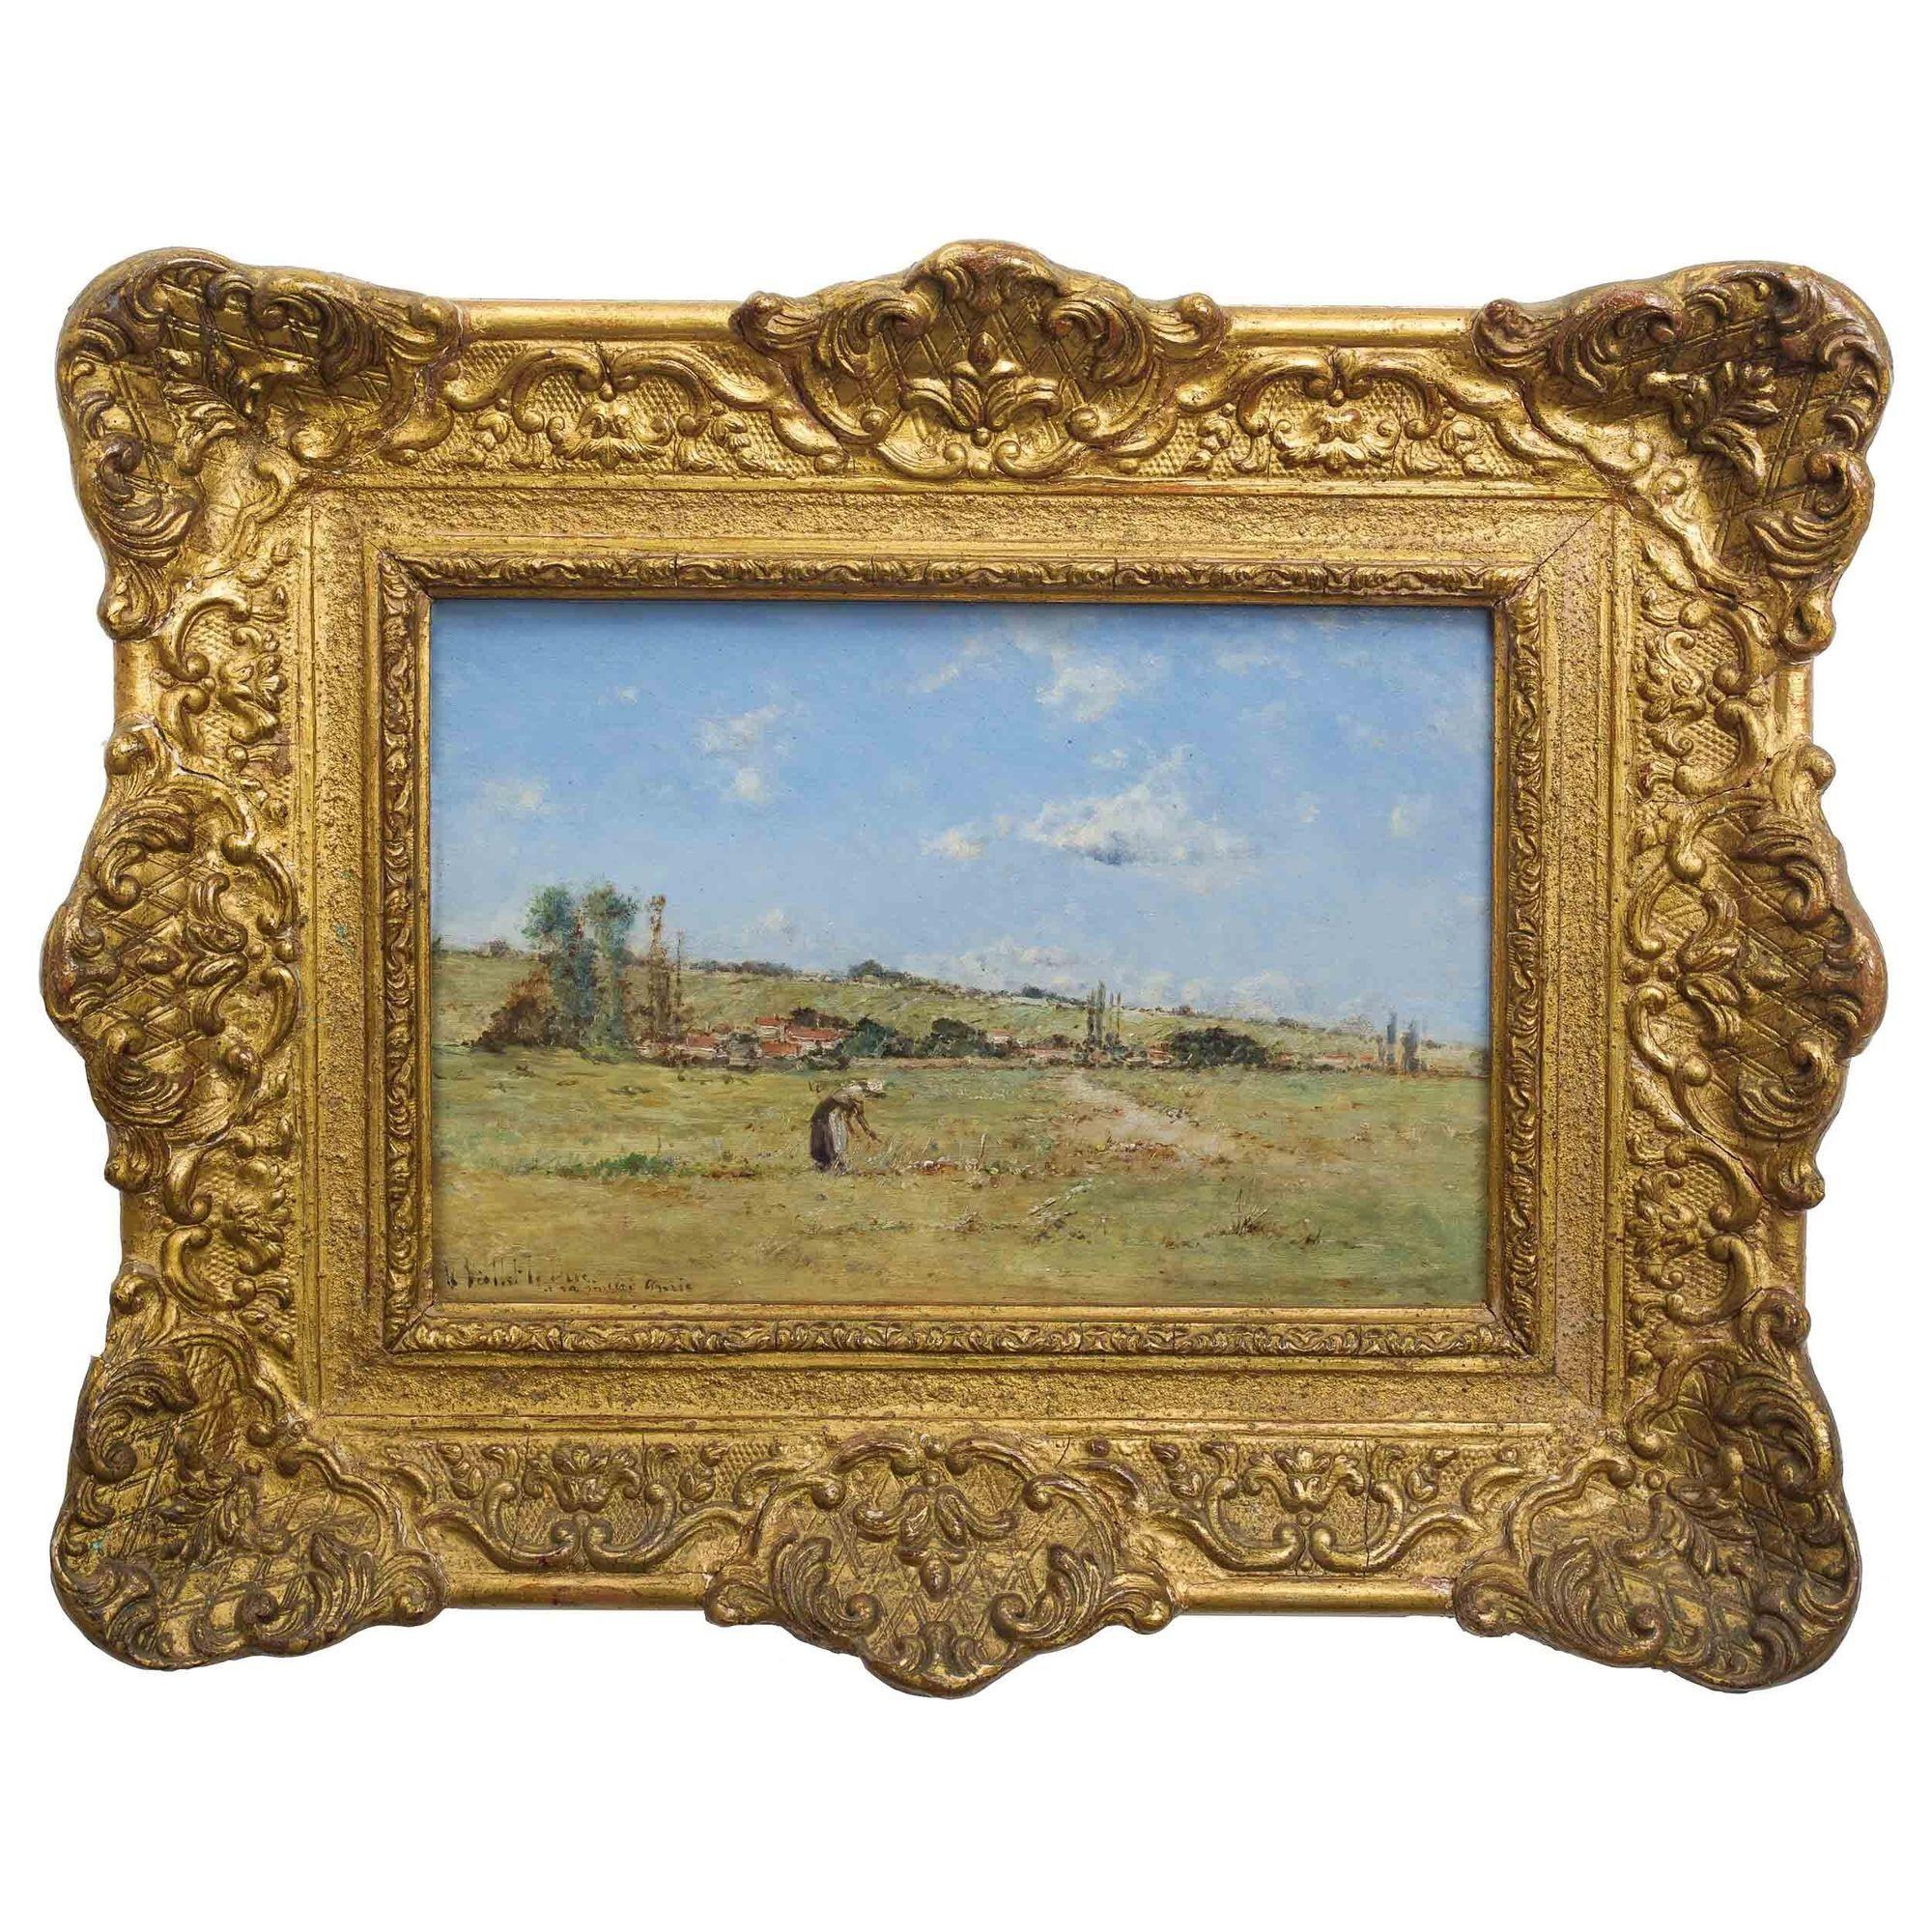 A fine small landscape scene in oil on panel of a lone woman plucking flowers from the cold fields of fall. The complex palette is rich with a mustard hue to the autumnal grasses while the trees and bushes along the horizon are executed in a